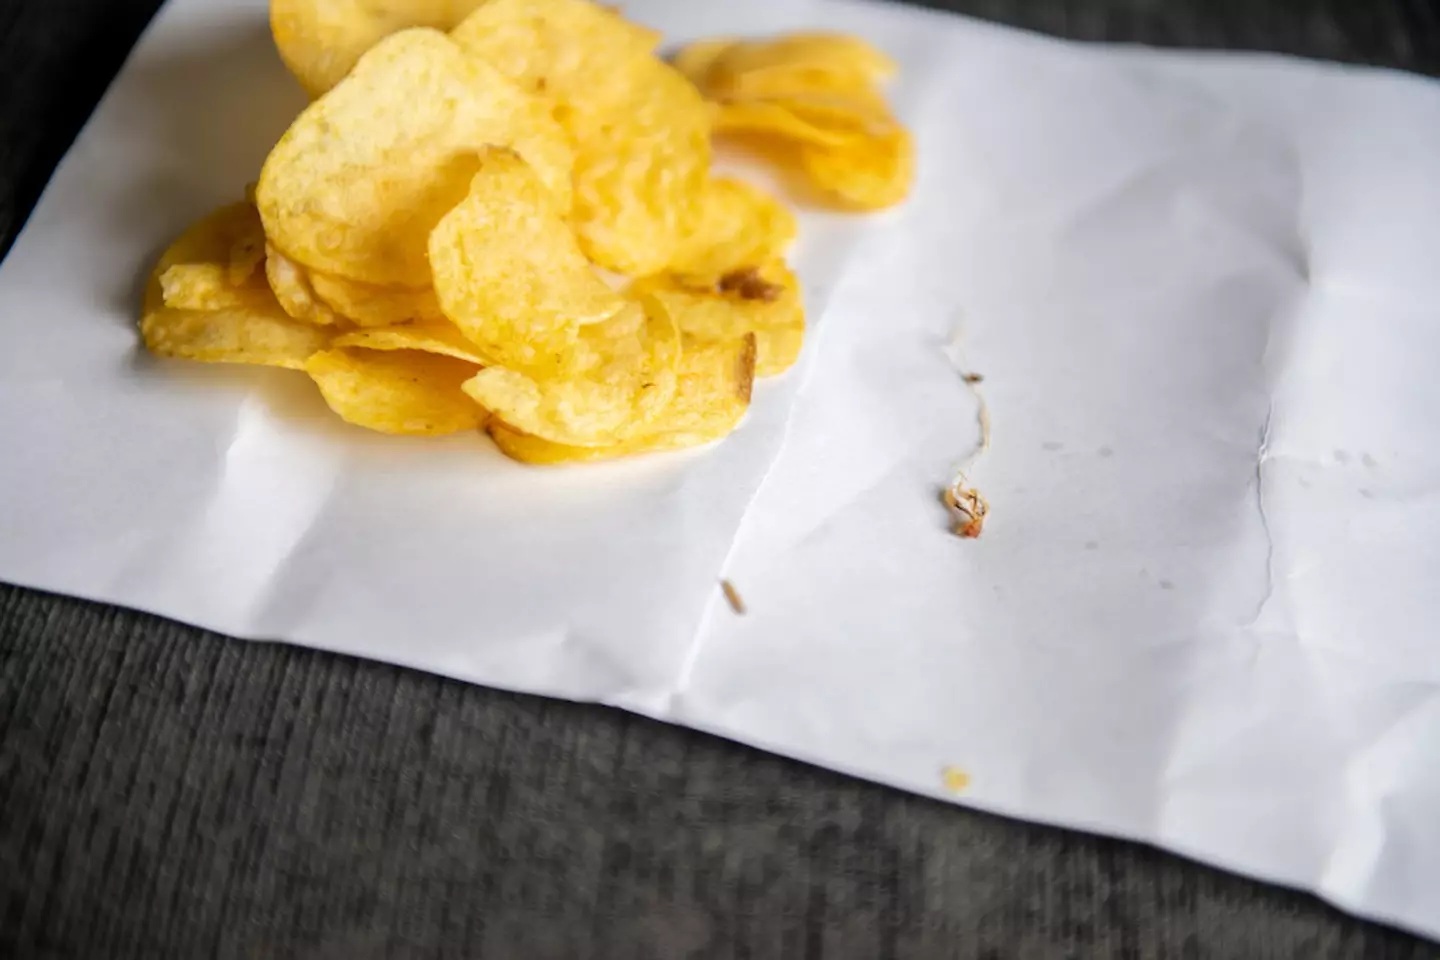 It's the last thing you'd want to find in your packet of crisps.